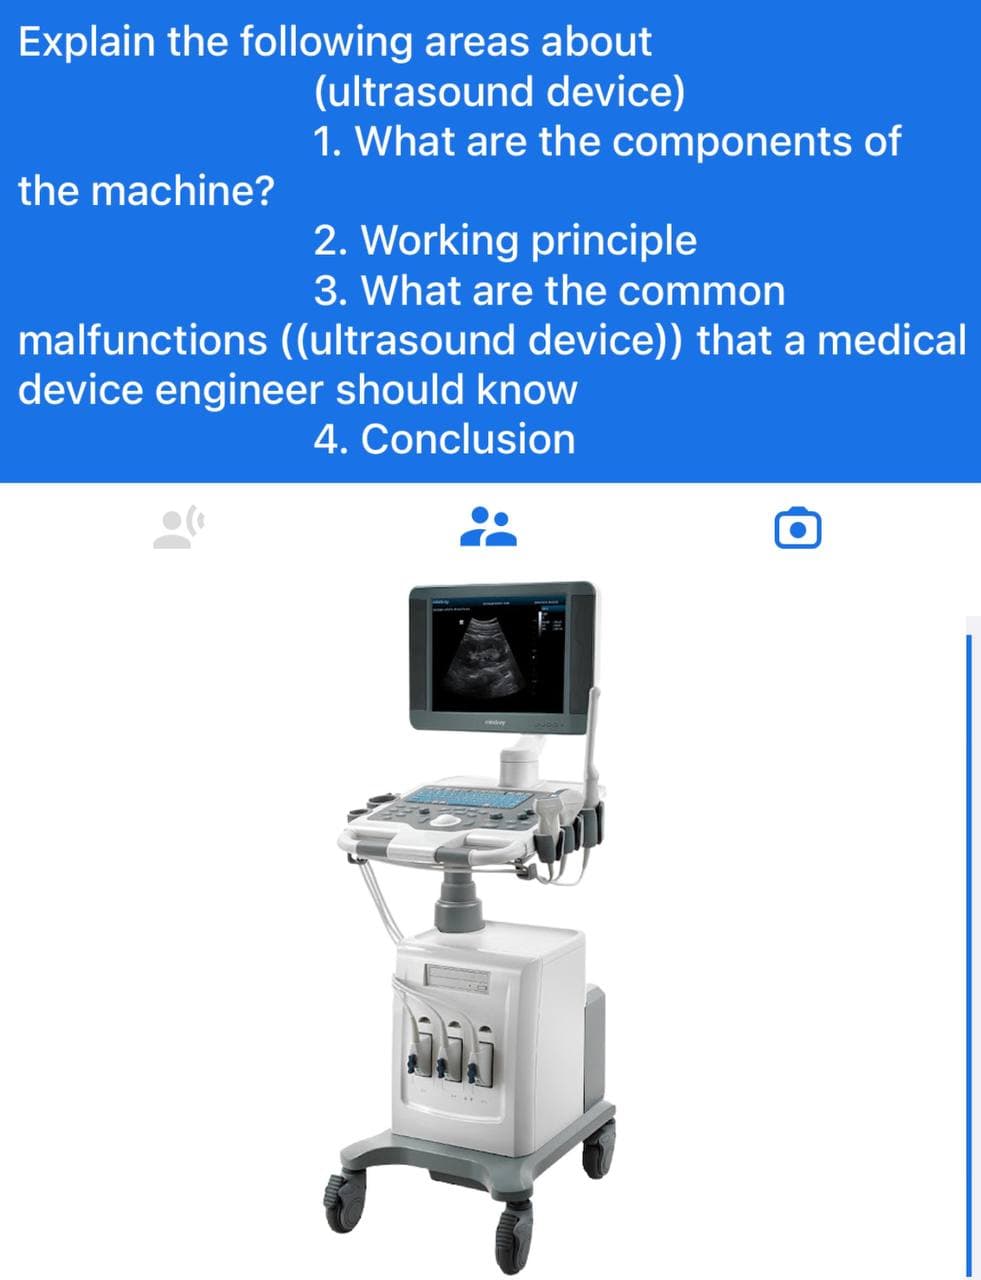 Explain the following areas about
(ultrasound device)
1. What are the components of
the machine?
2. Working principle
3. What are the common
malfunctions ((ultrasound device)) that a medical
device engineer should know
4. Conclusion